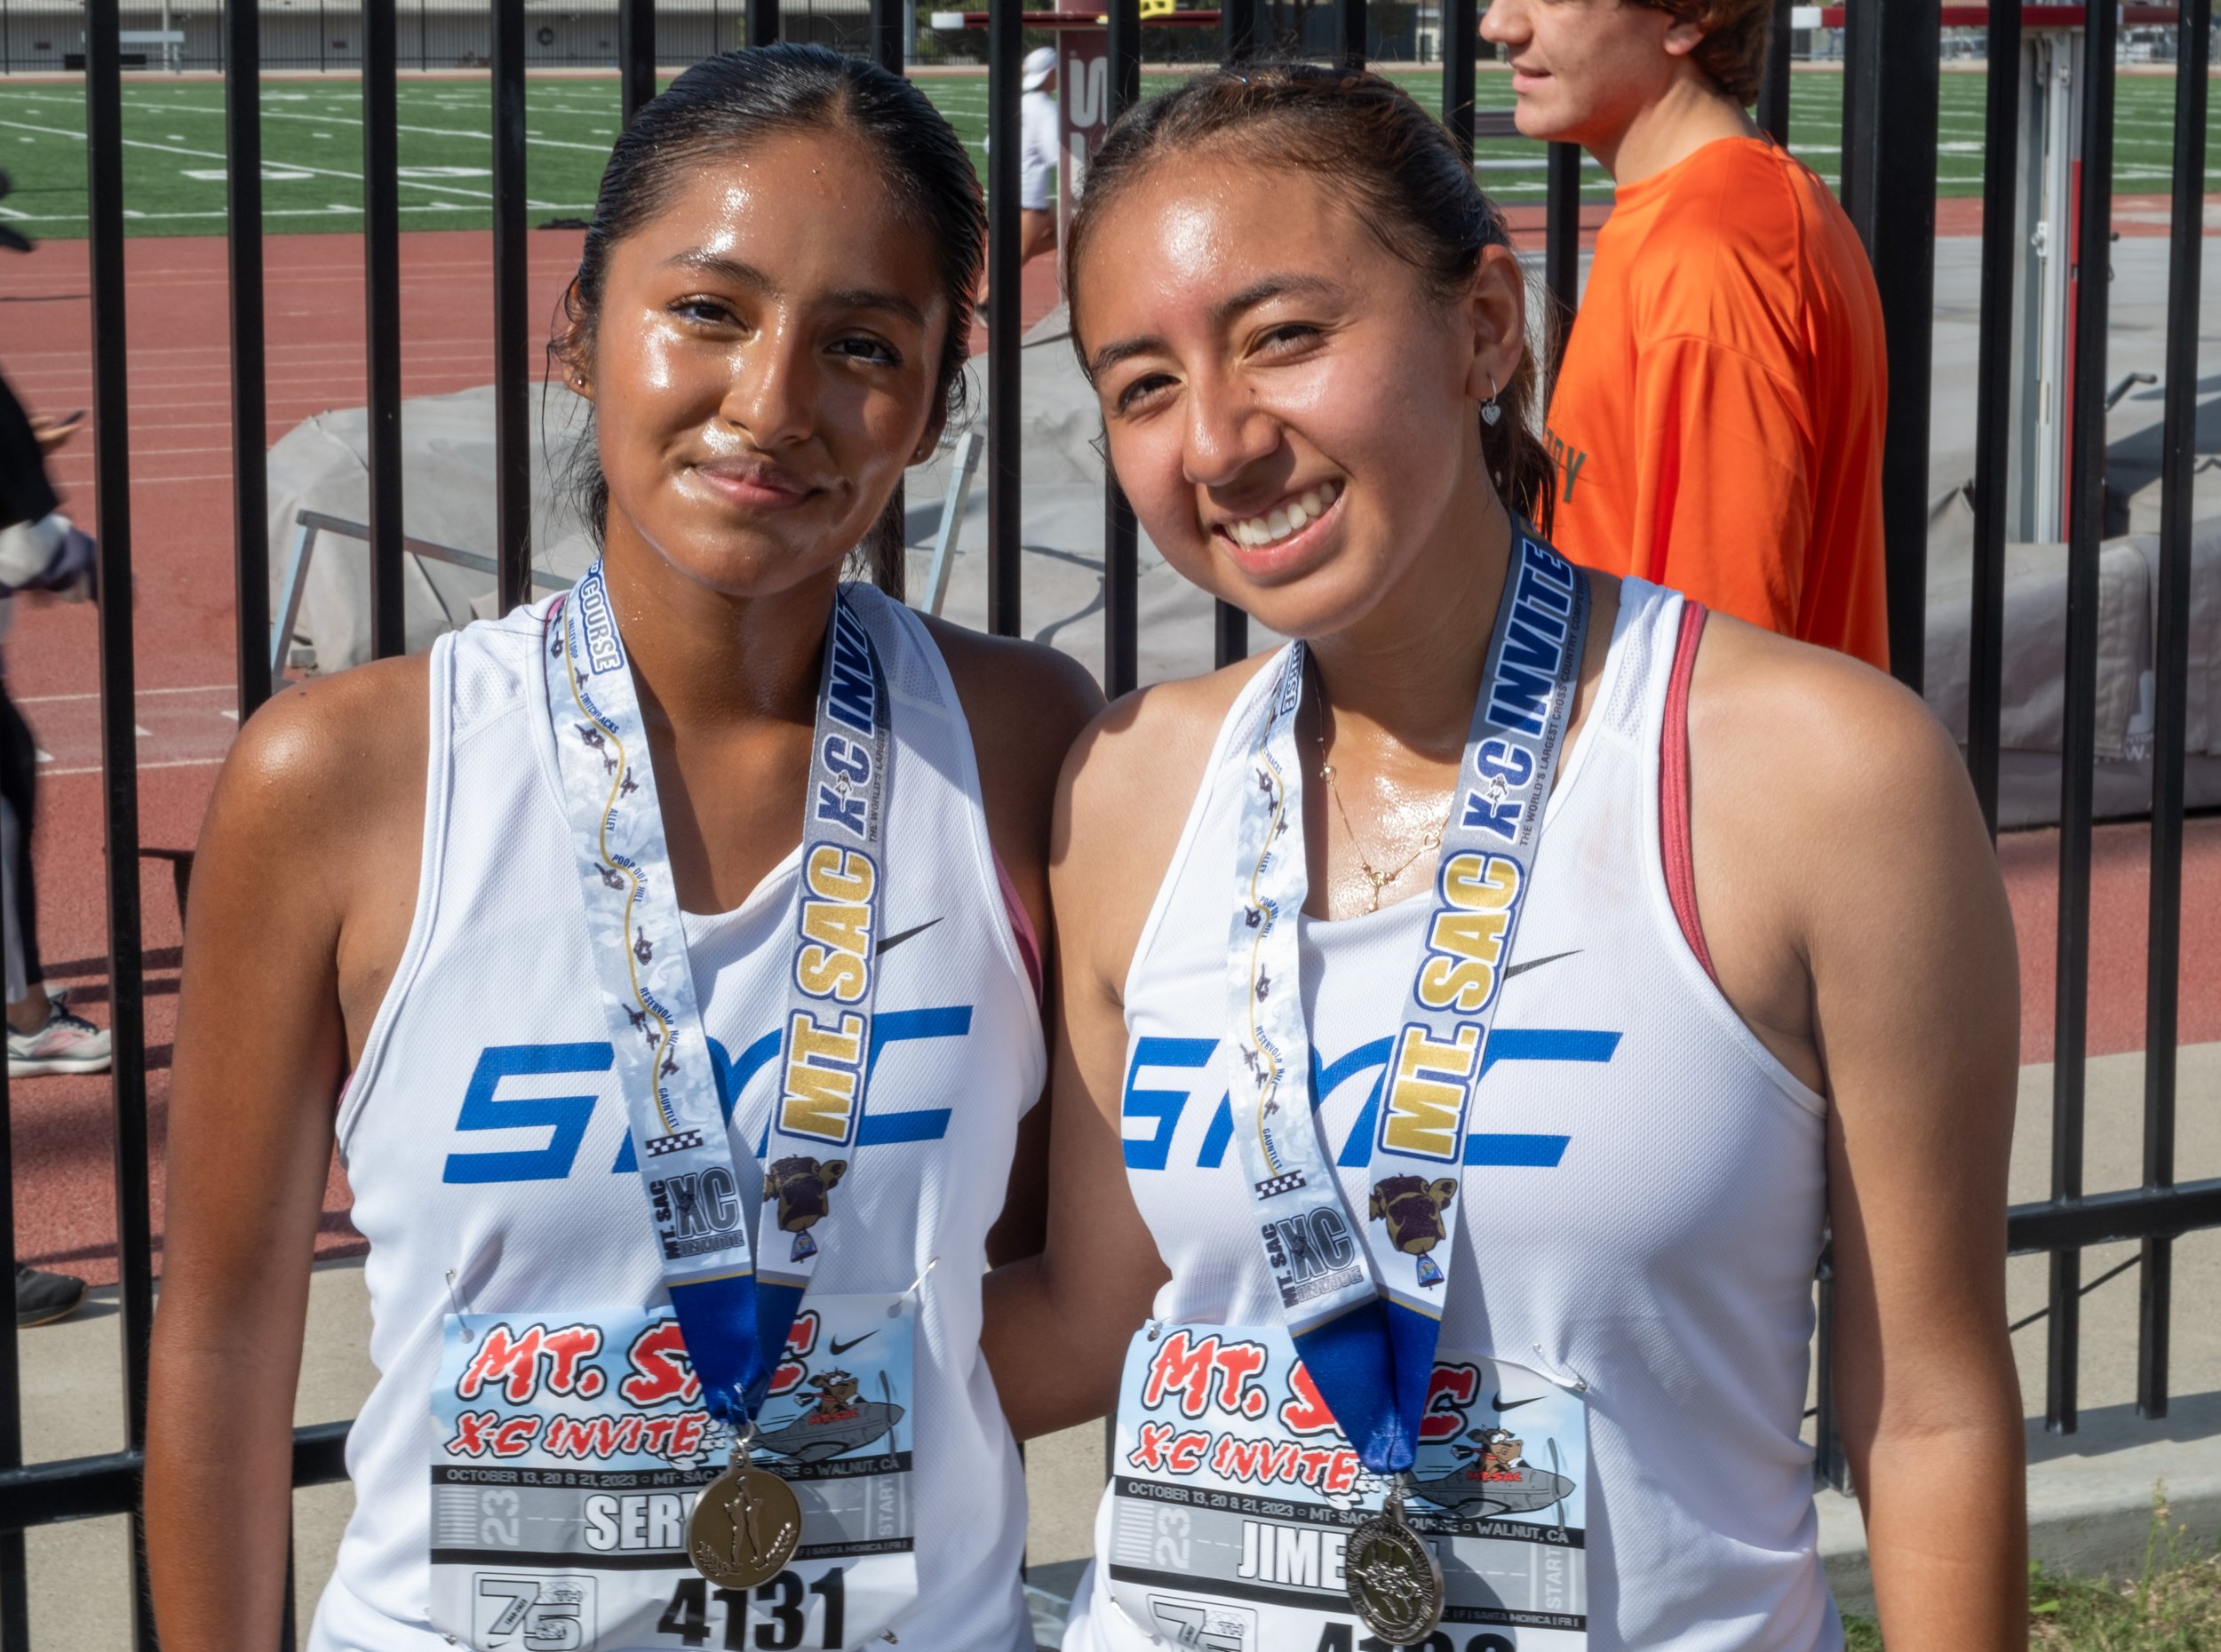  Lisa Servin(L) and Sarahi Jimenez(R) with their medals at the end of the MT. SAC Cross Country Invitational on Friday, Oct 13 at MT. SAC in Walnut, Calif. (Danilo Perez | The Corsair) 